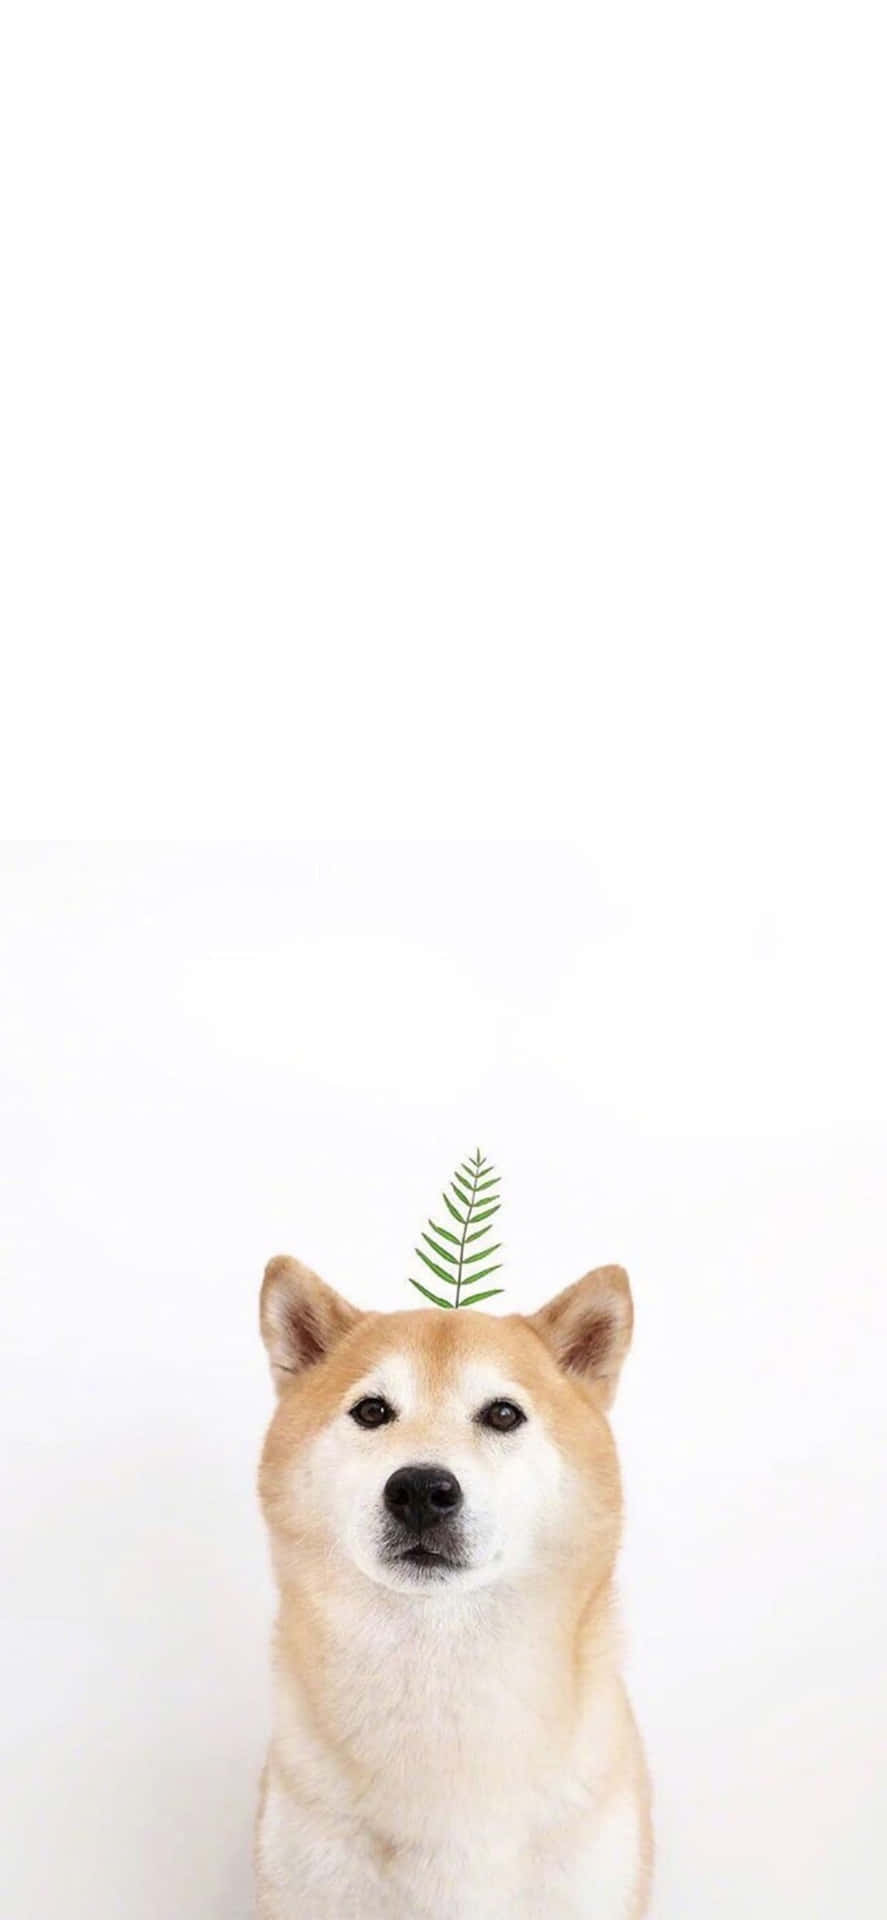 Get close to nature with this adorable Cute Animal iPhone wallpaper Wallpaper